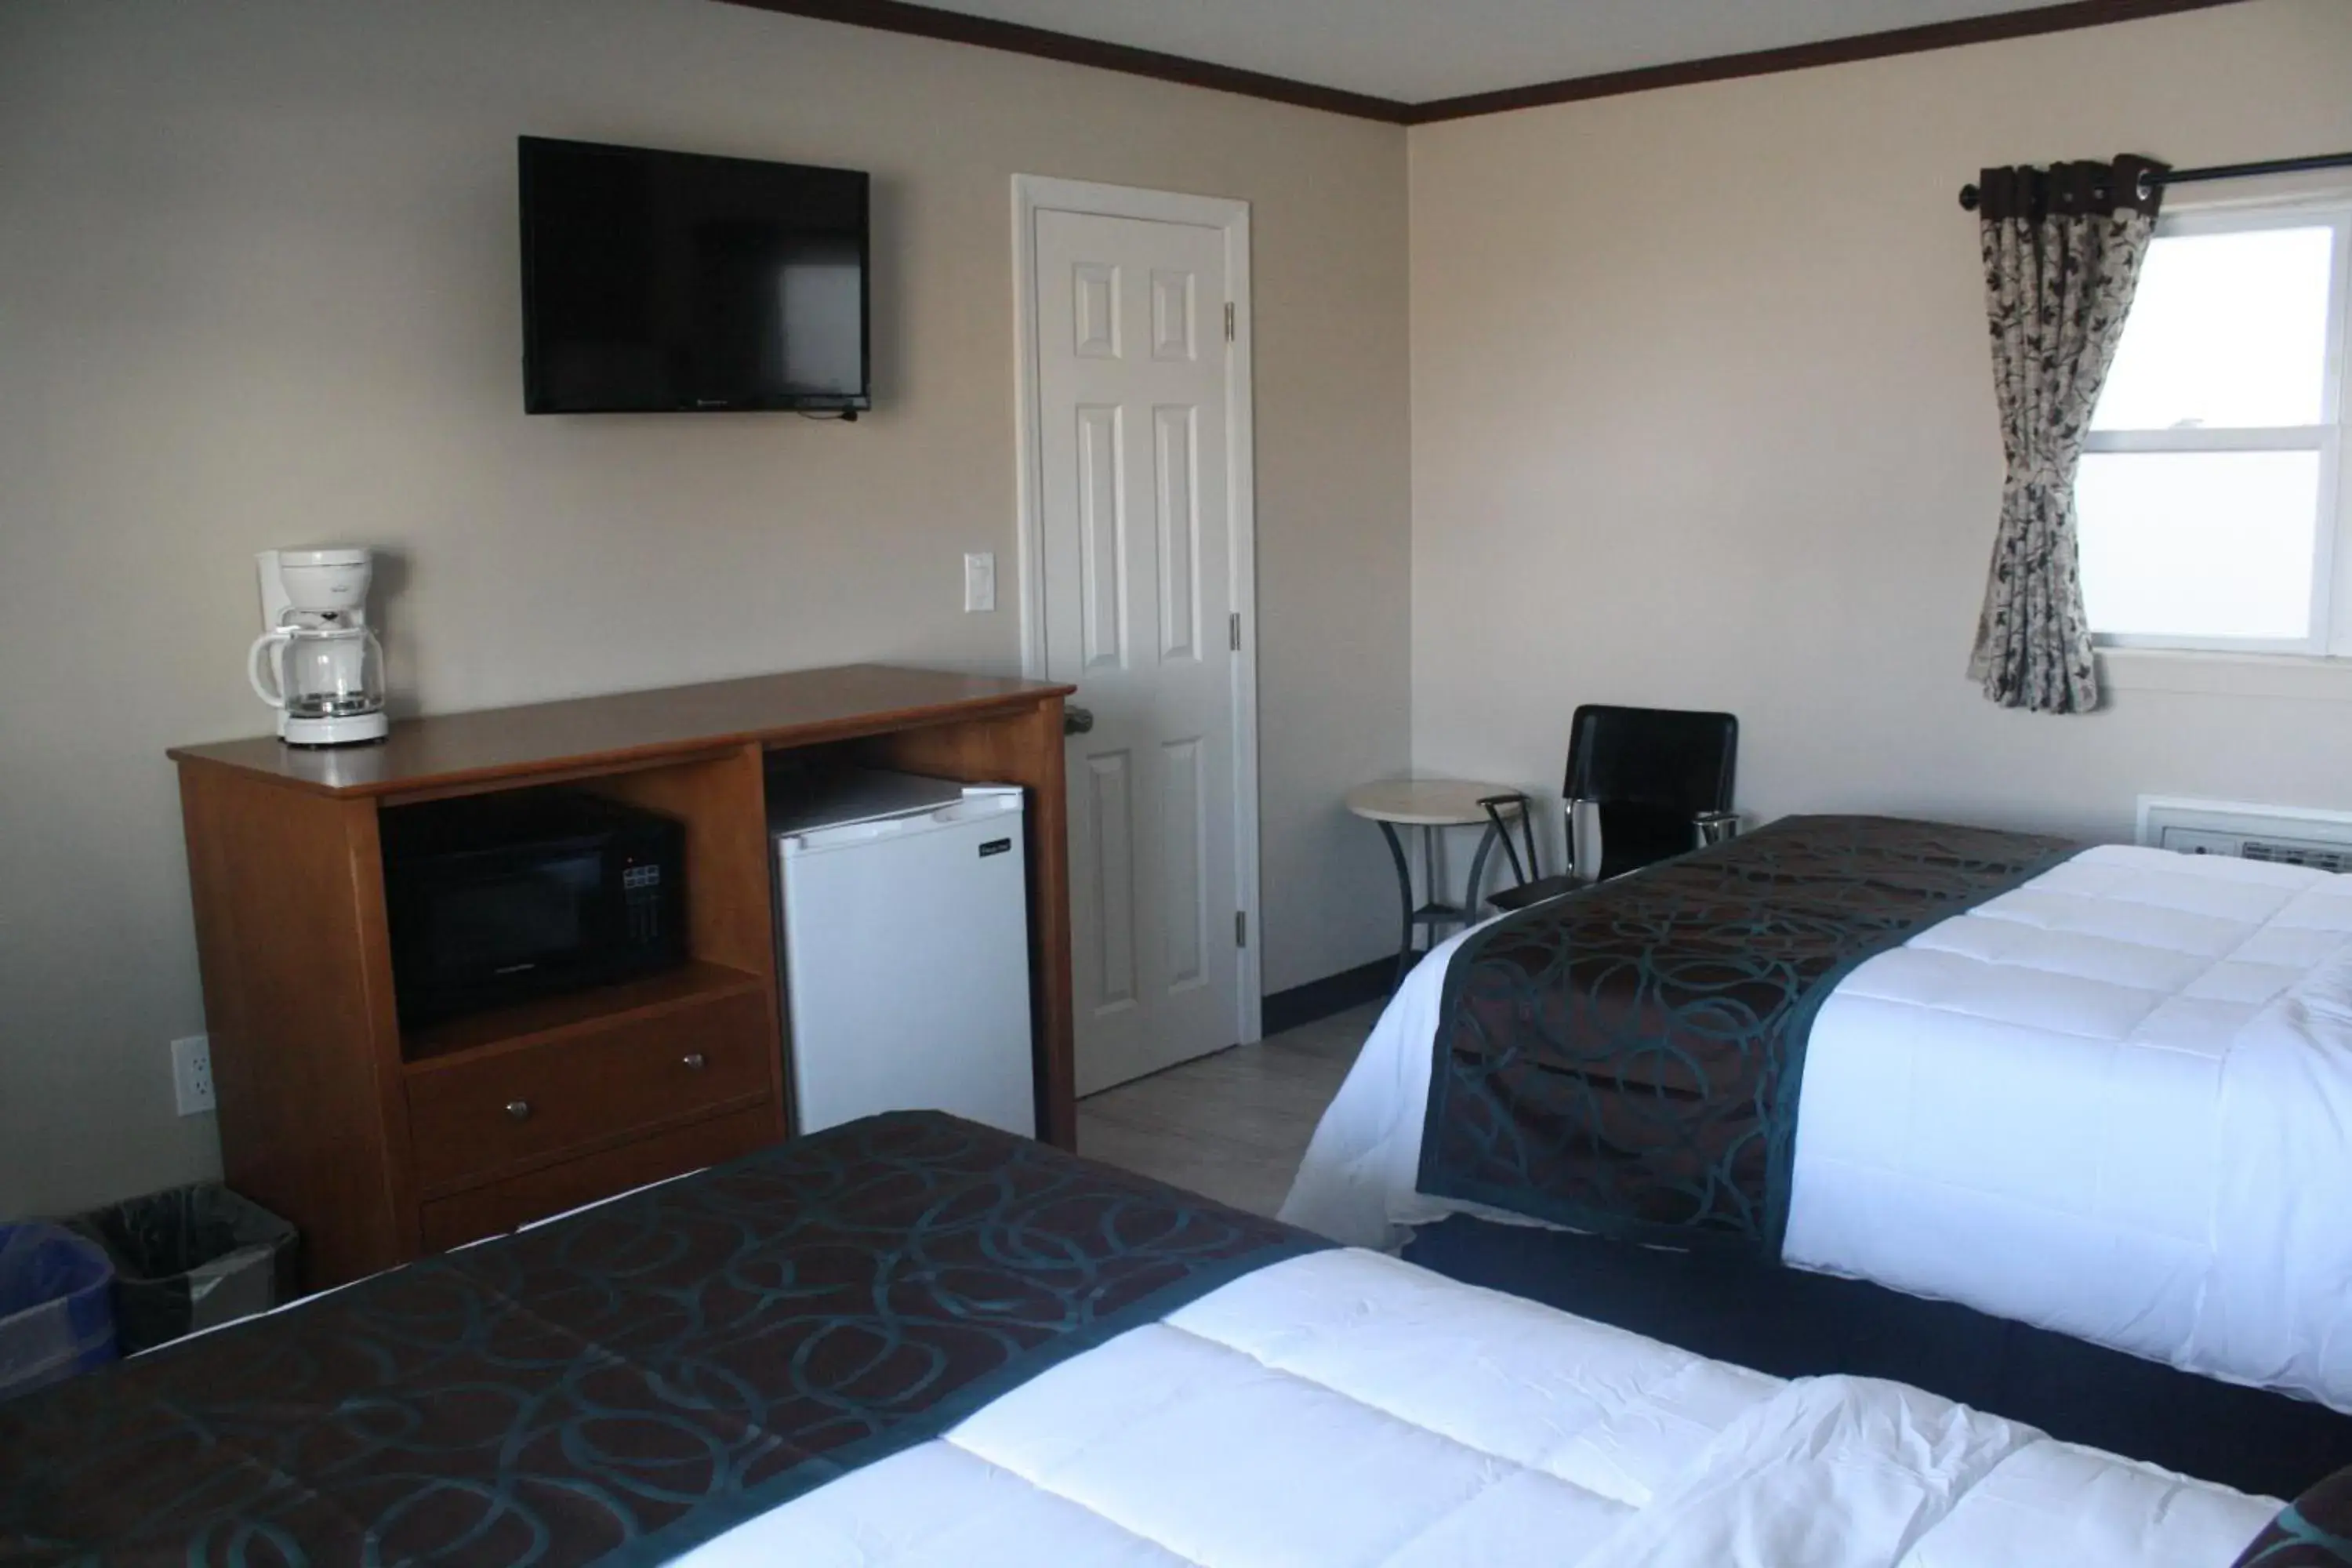 Area and facilities, Bed in Beachside Resort